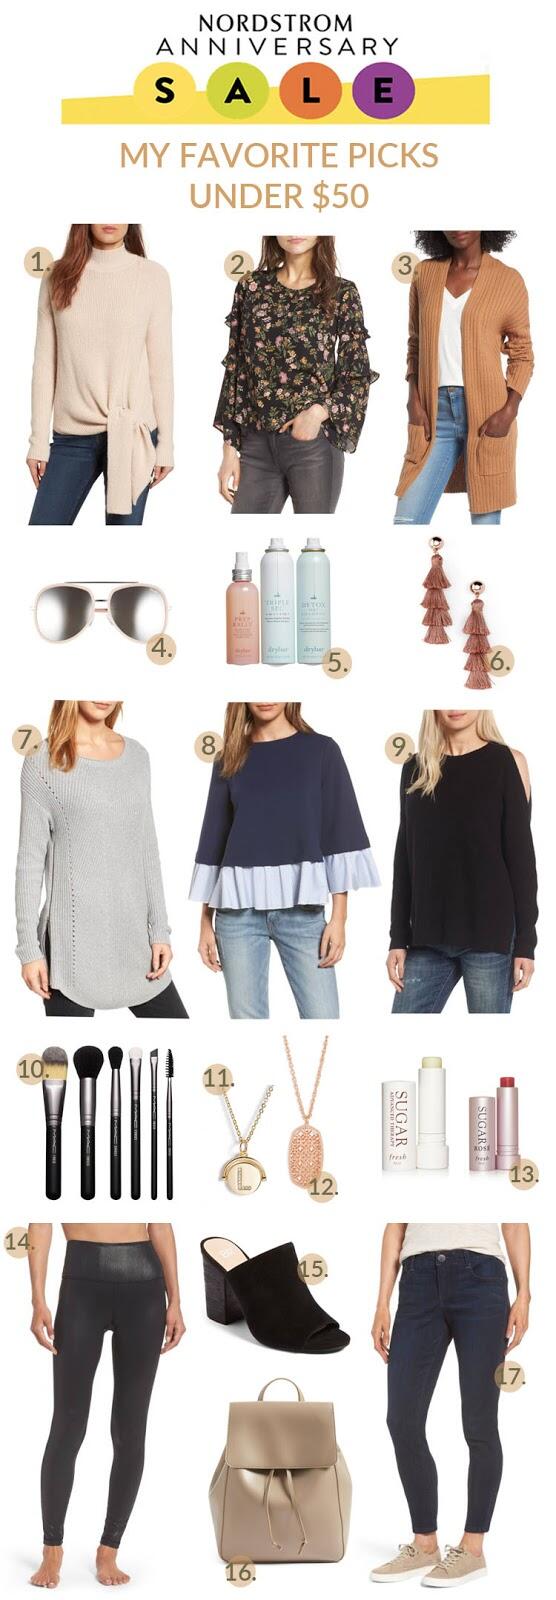 $50 & Under Nordstrom Anniversary Sale Picks featured by popular fashion blogger, Walking in Memphis in High Heels